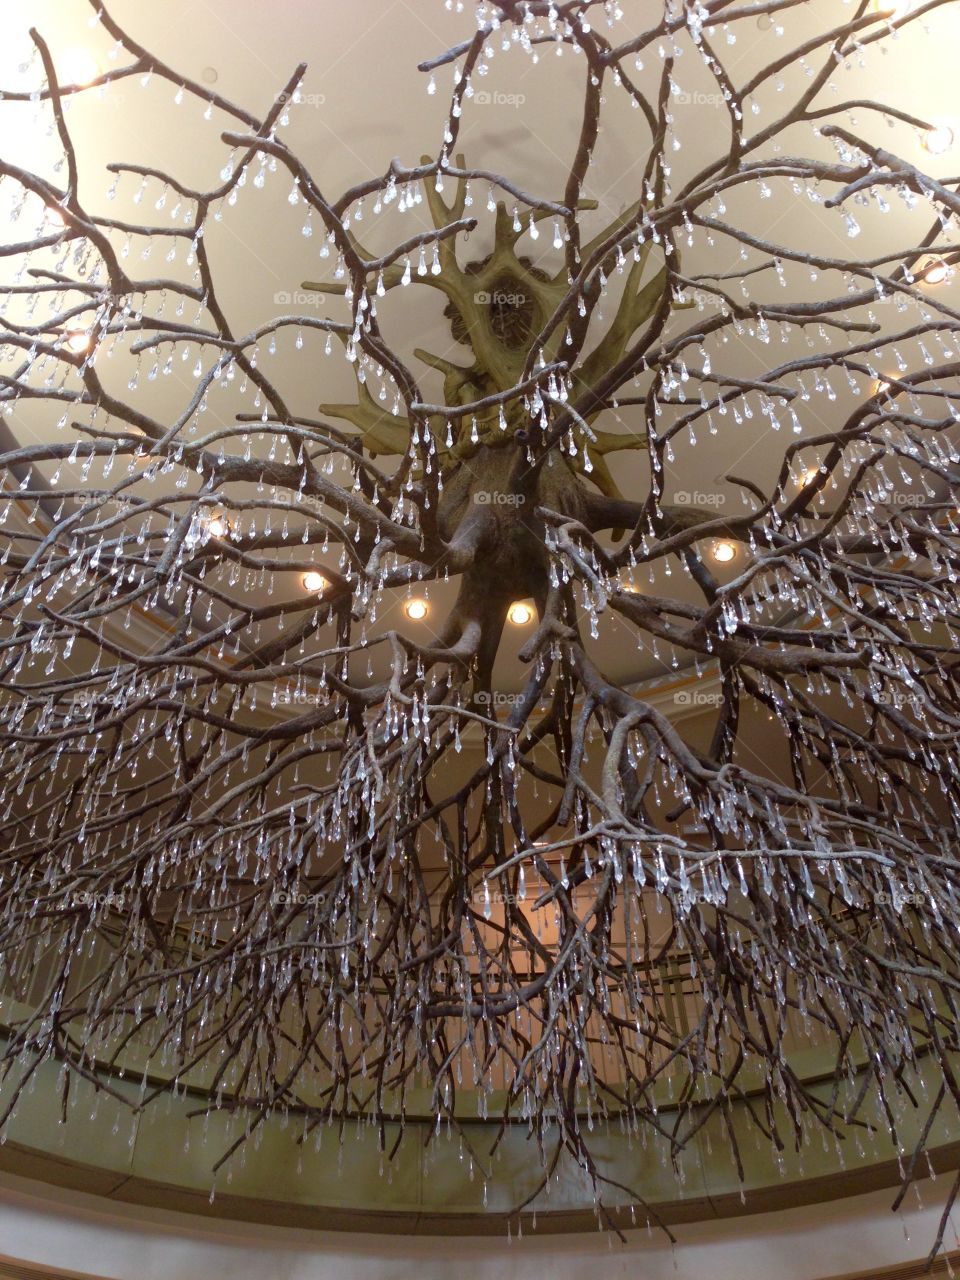 Icy Chandelier 